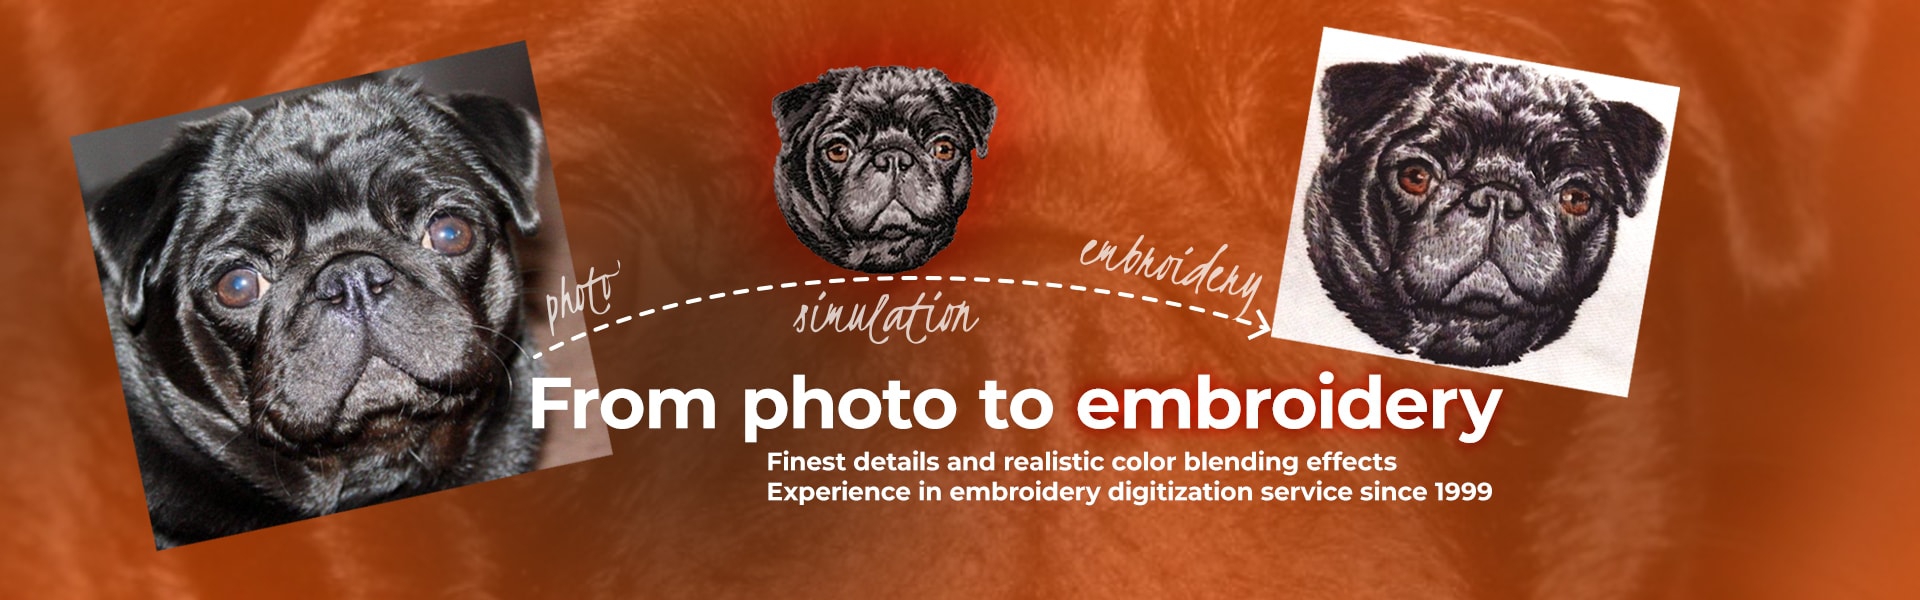 From photo to embroidery, Finest details and realistic color blending effects